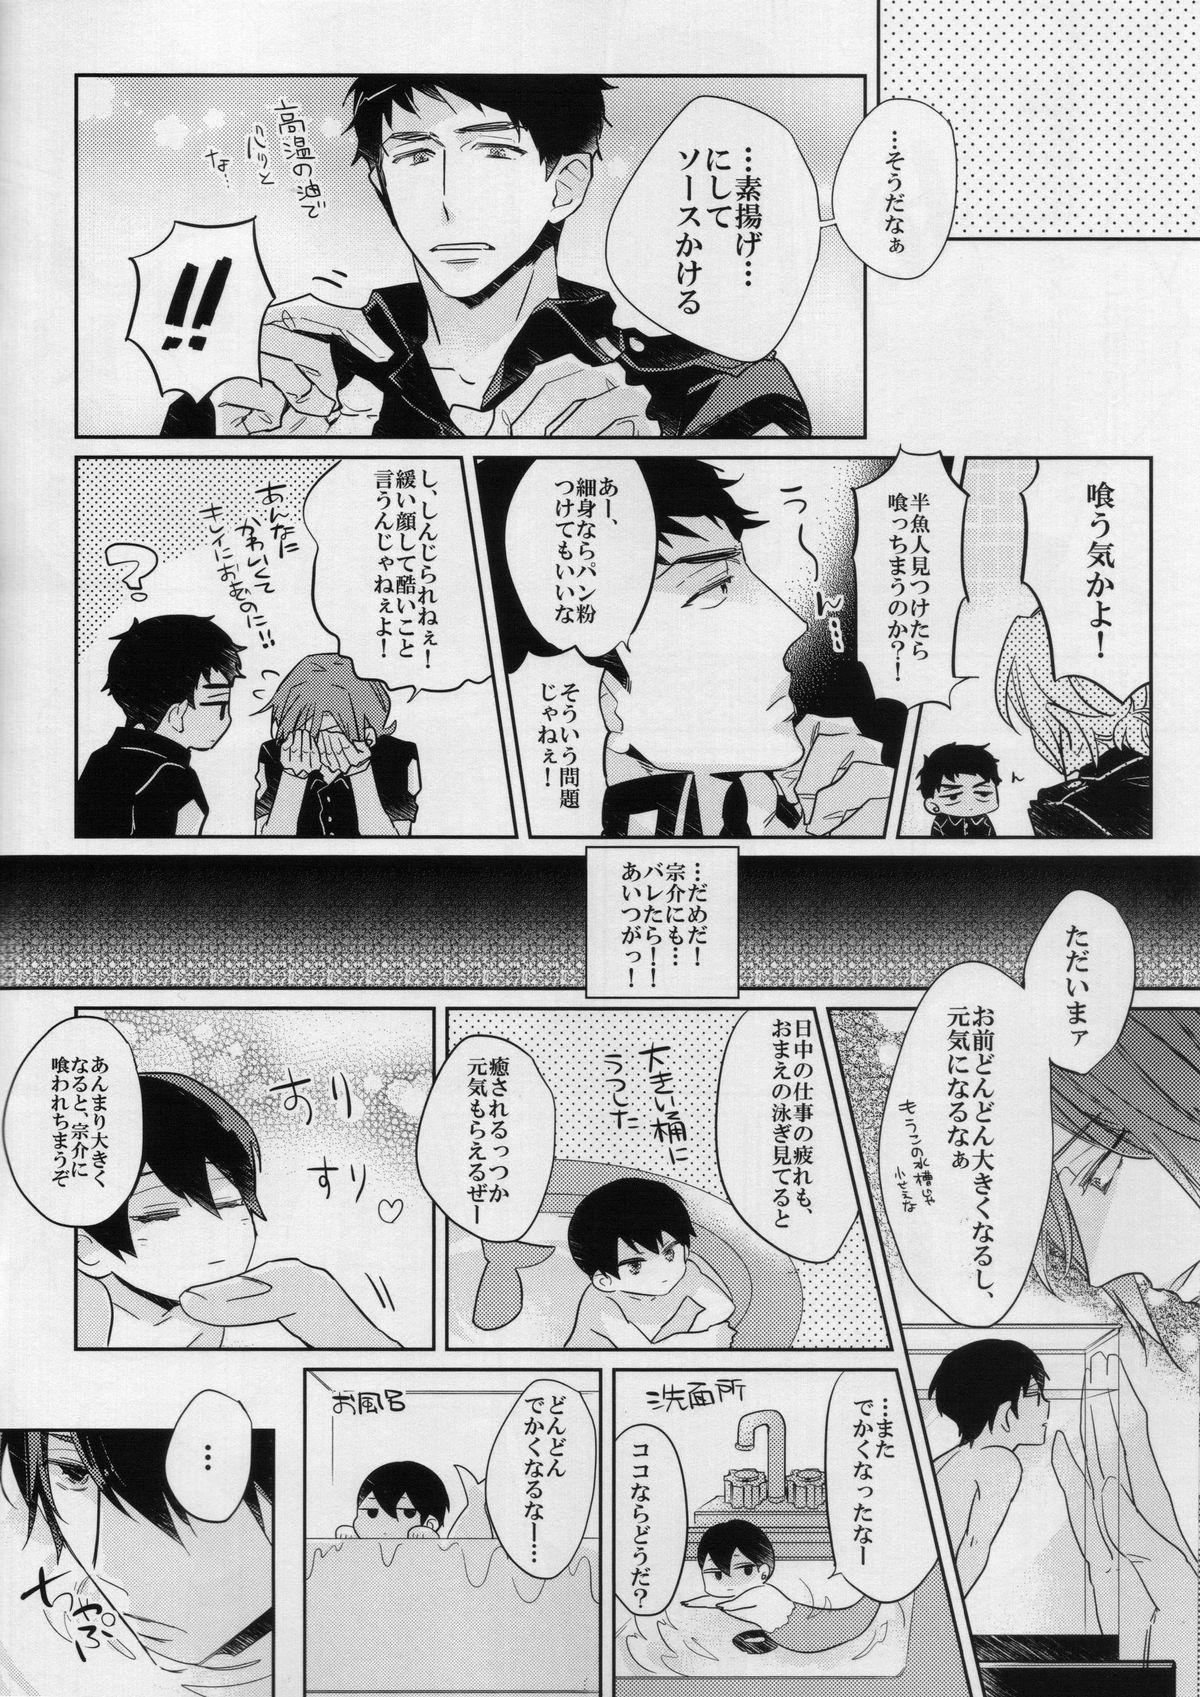 Asshole Ore to Omae no Miracle Love - Free Gay Solo - Page 4